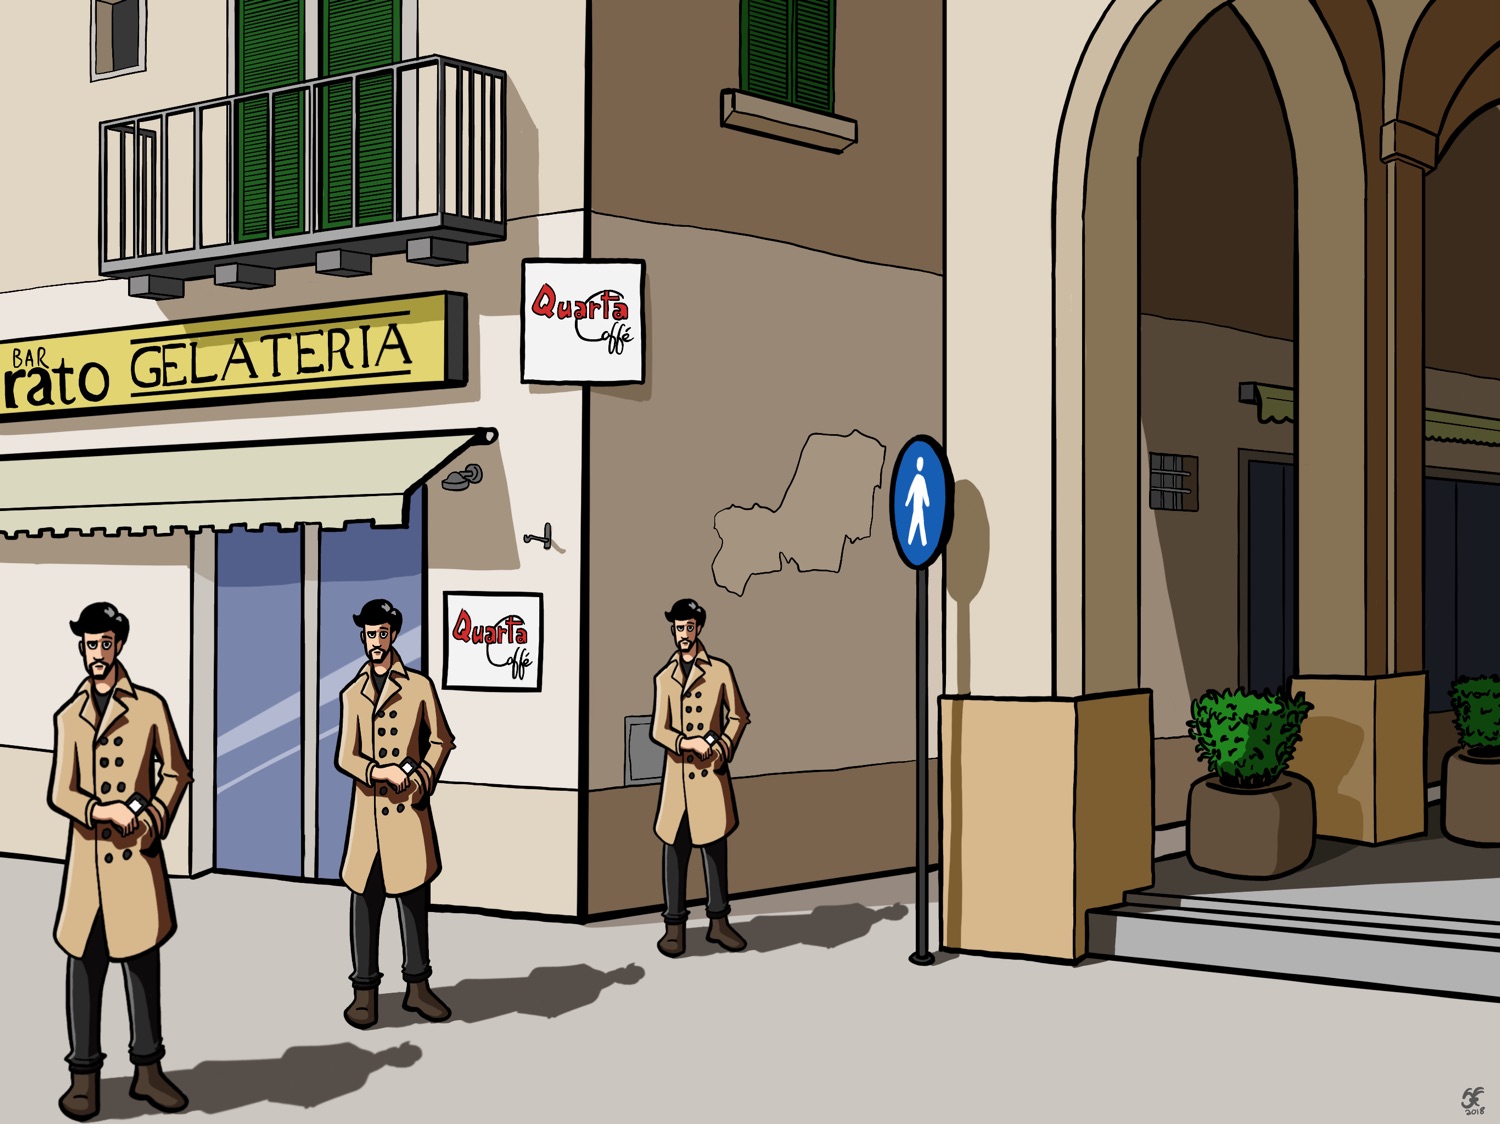 An illustration of a piazza in Lecce, Italy. There are three men in trench coats standing in the piazza and their perspective so they gradually get smaller the further into the scene they go.